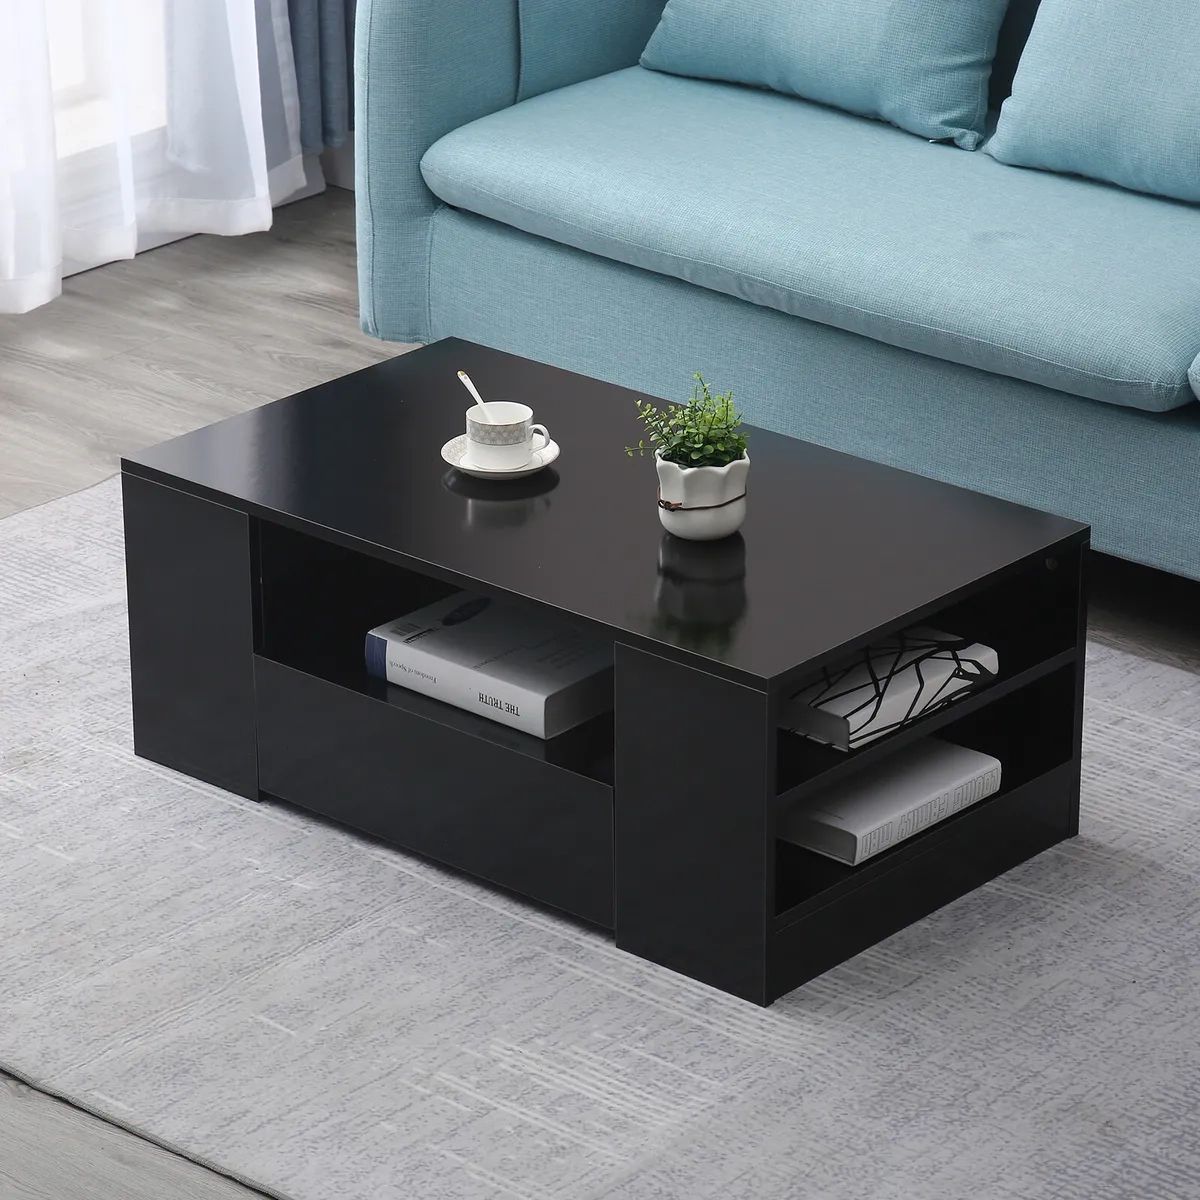 Modern Black Coffee Table High Gloss Rectangular End Table W/ 2 Drawers For  Home | Ebay For High Gloss Black Coffee Tables (View 7 of 15)